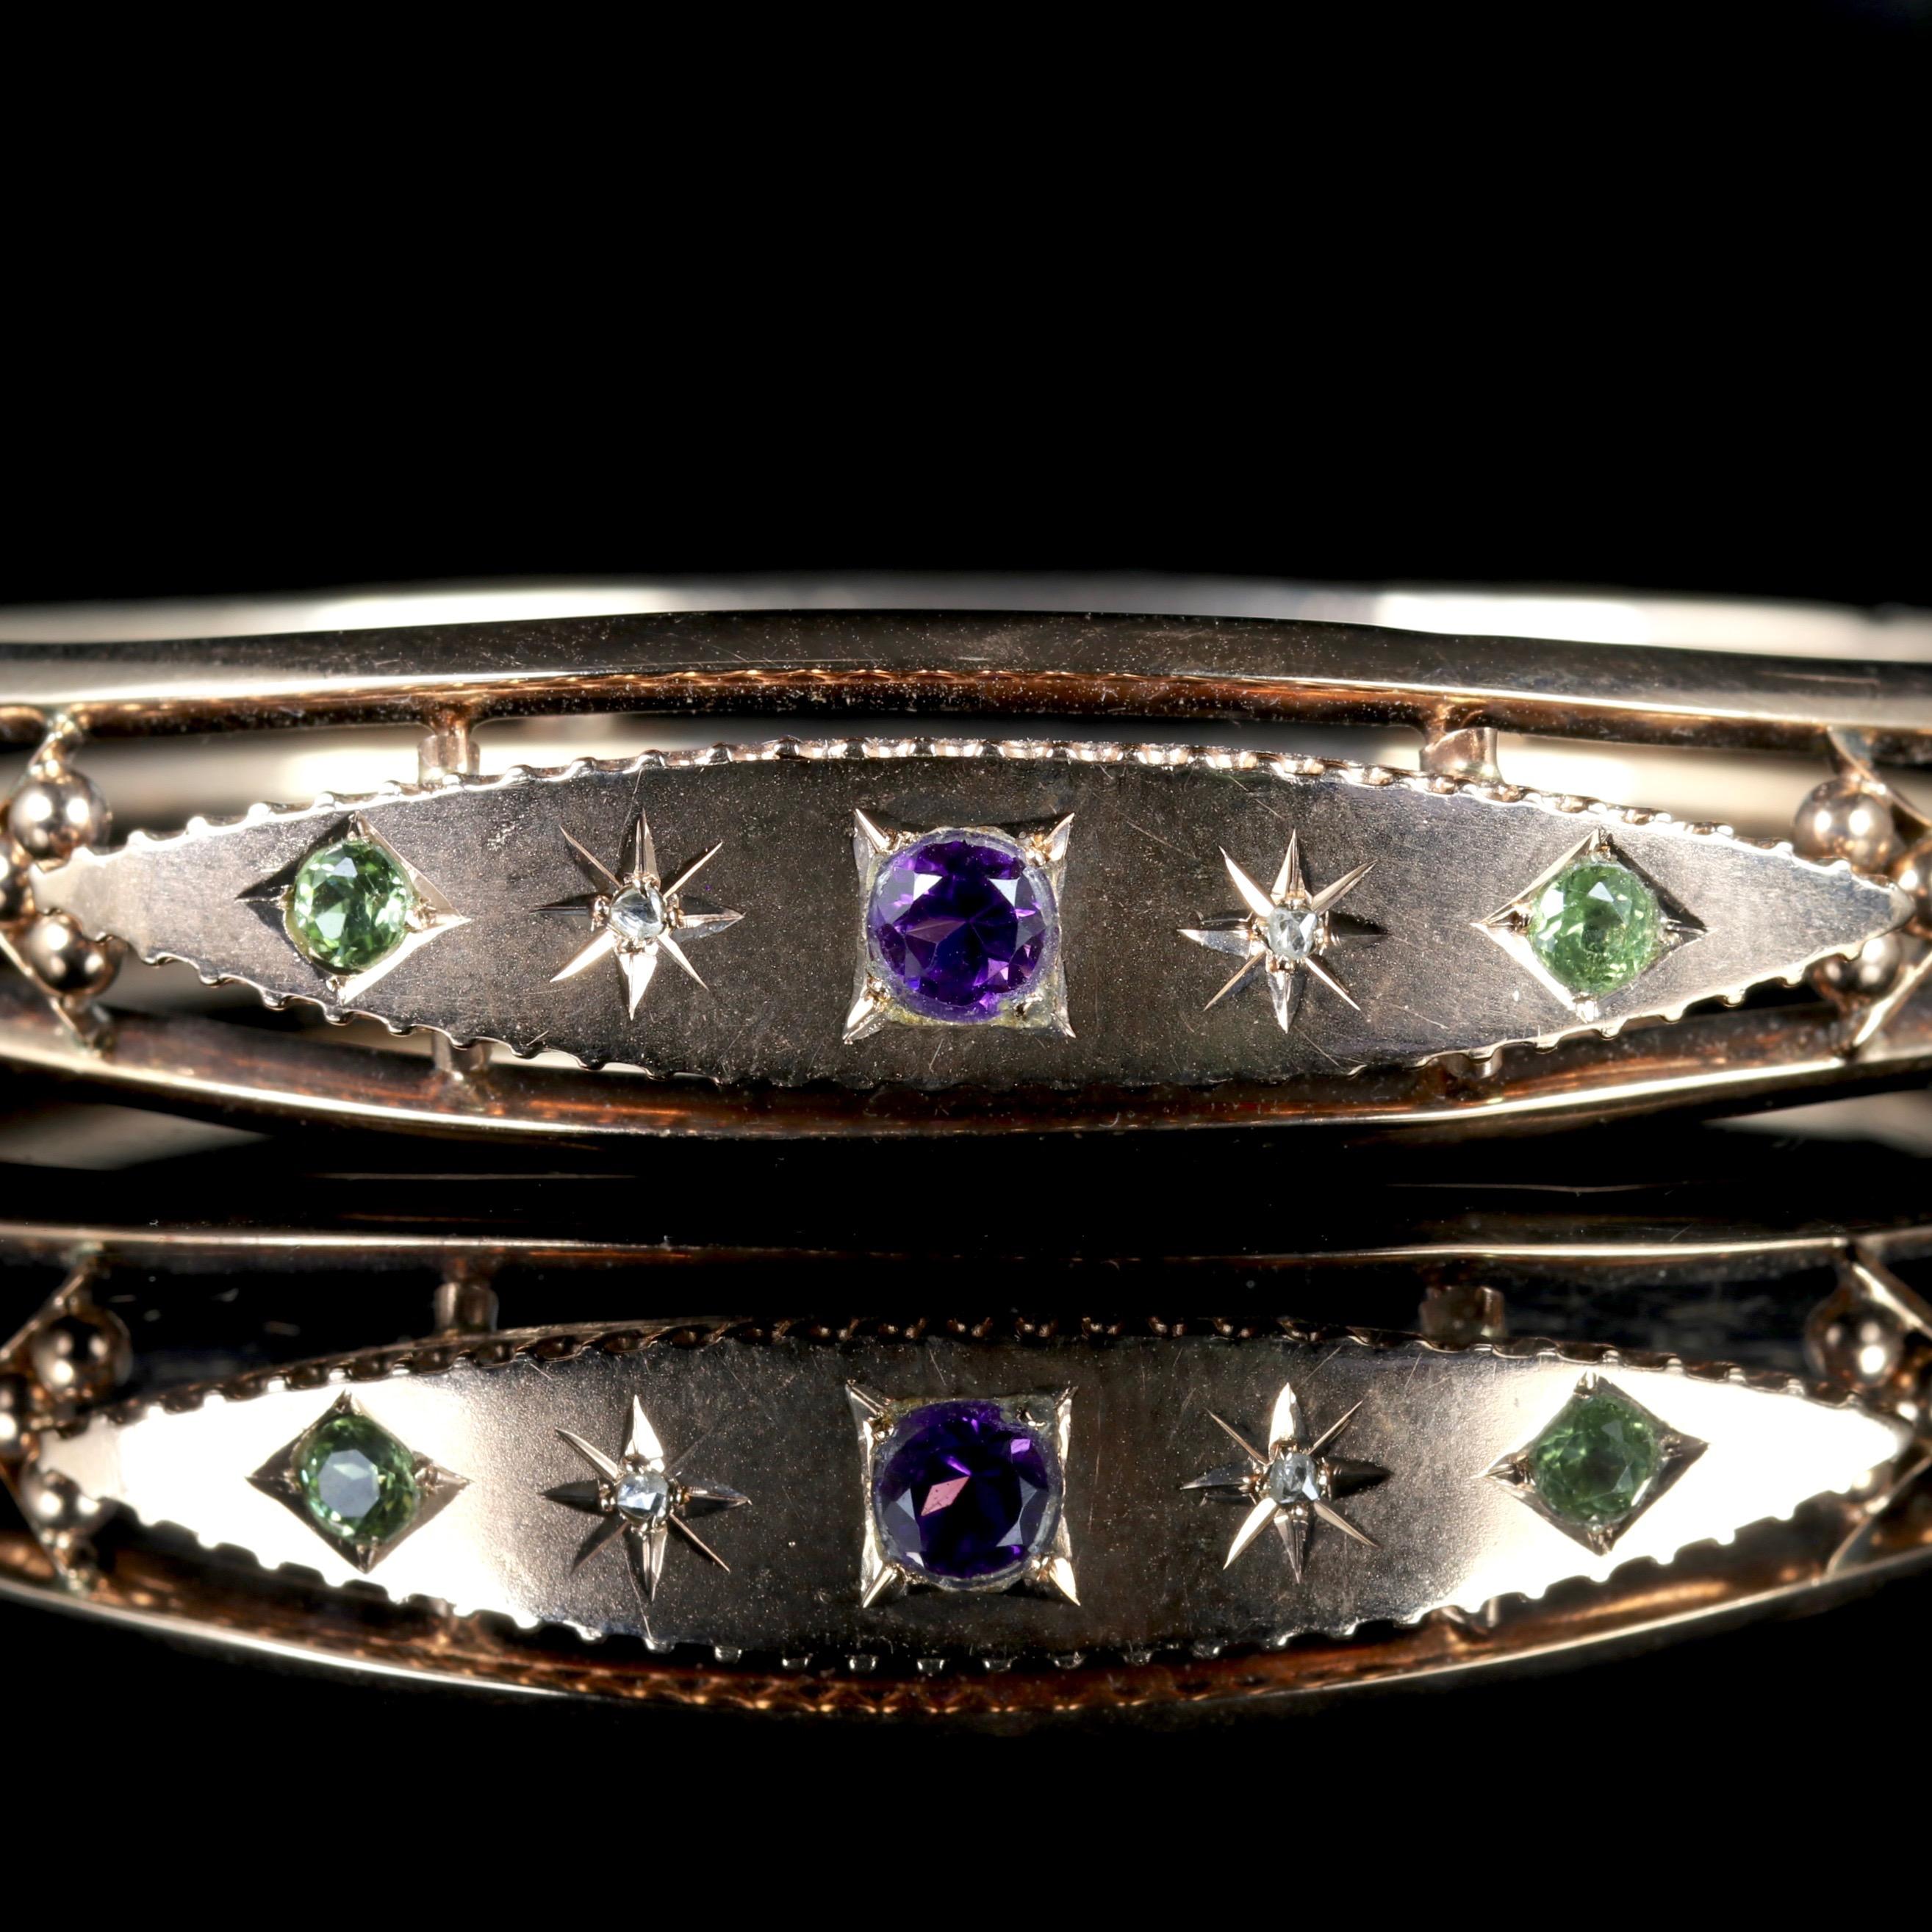 This fabulous Victorian 9ct Rose Gold Suffragette bangle is Circa 1900. 

The bangle boasts a central Amethyst, Diamonds and Peridots in a beautiful gallery.

Green is for Give, white is for Women and violet is for Votes.

Suffragettes liked to be